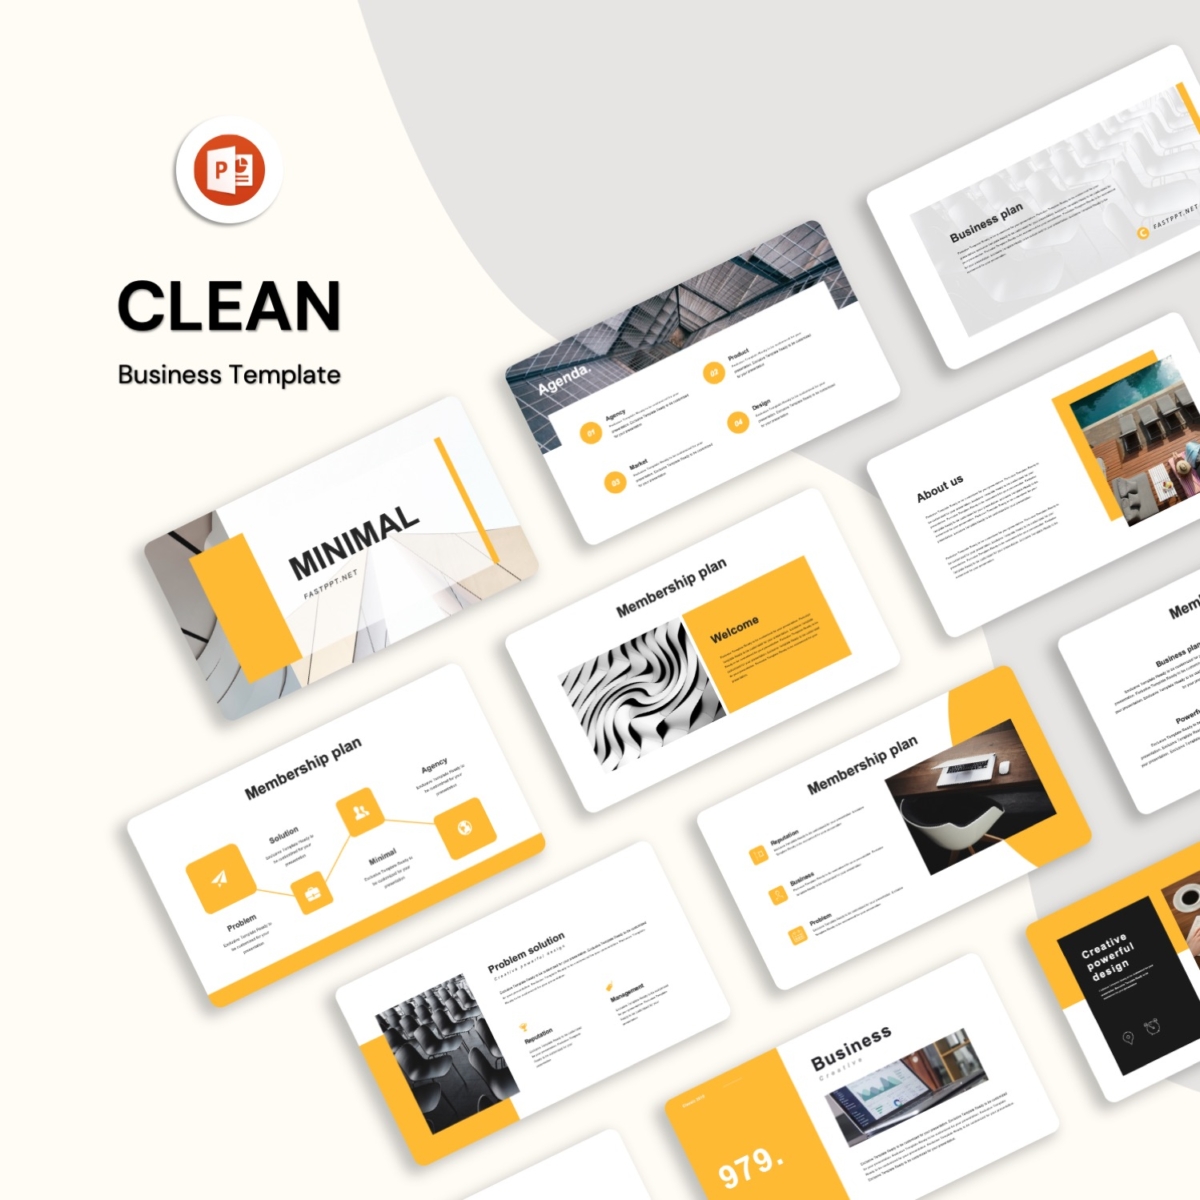 Clean Business & Introduction PowerPoint Template. Corporate PowerPoint Template. PowerPoint Templates Professional